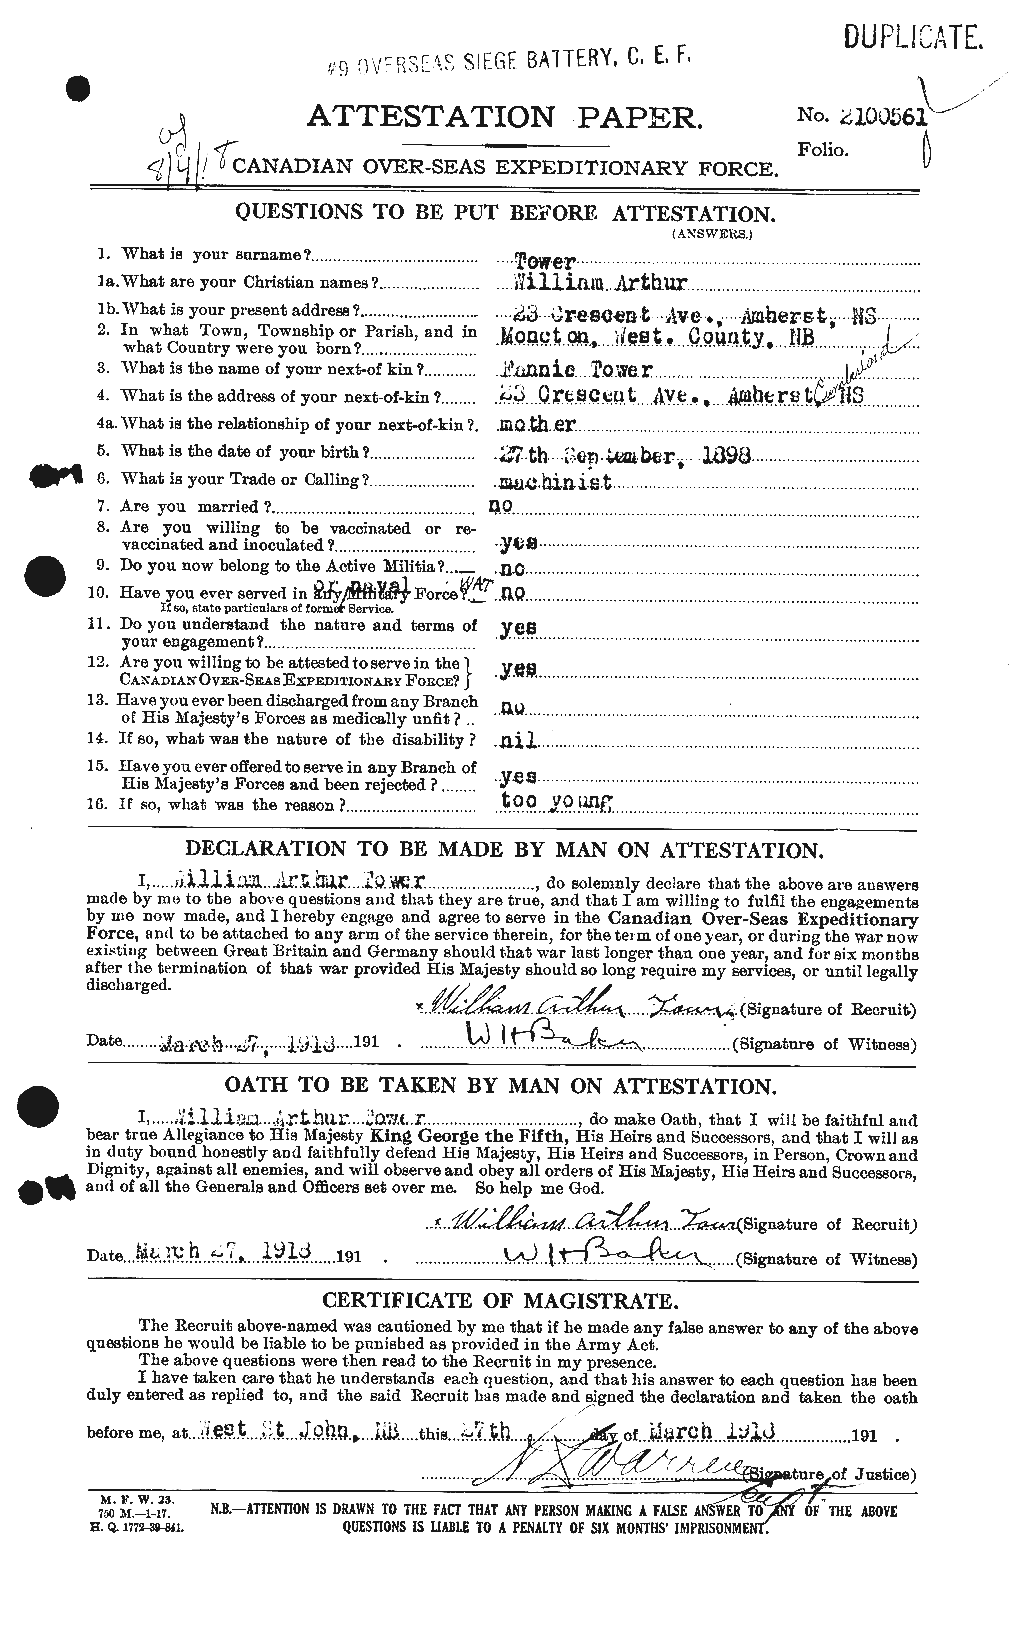 Personnel Records of the First World War - CEF 636205a